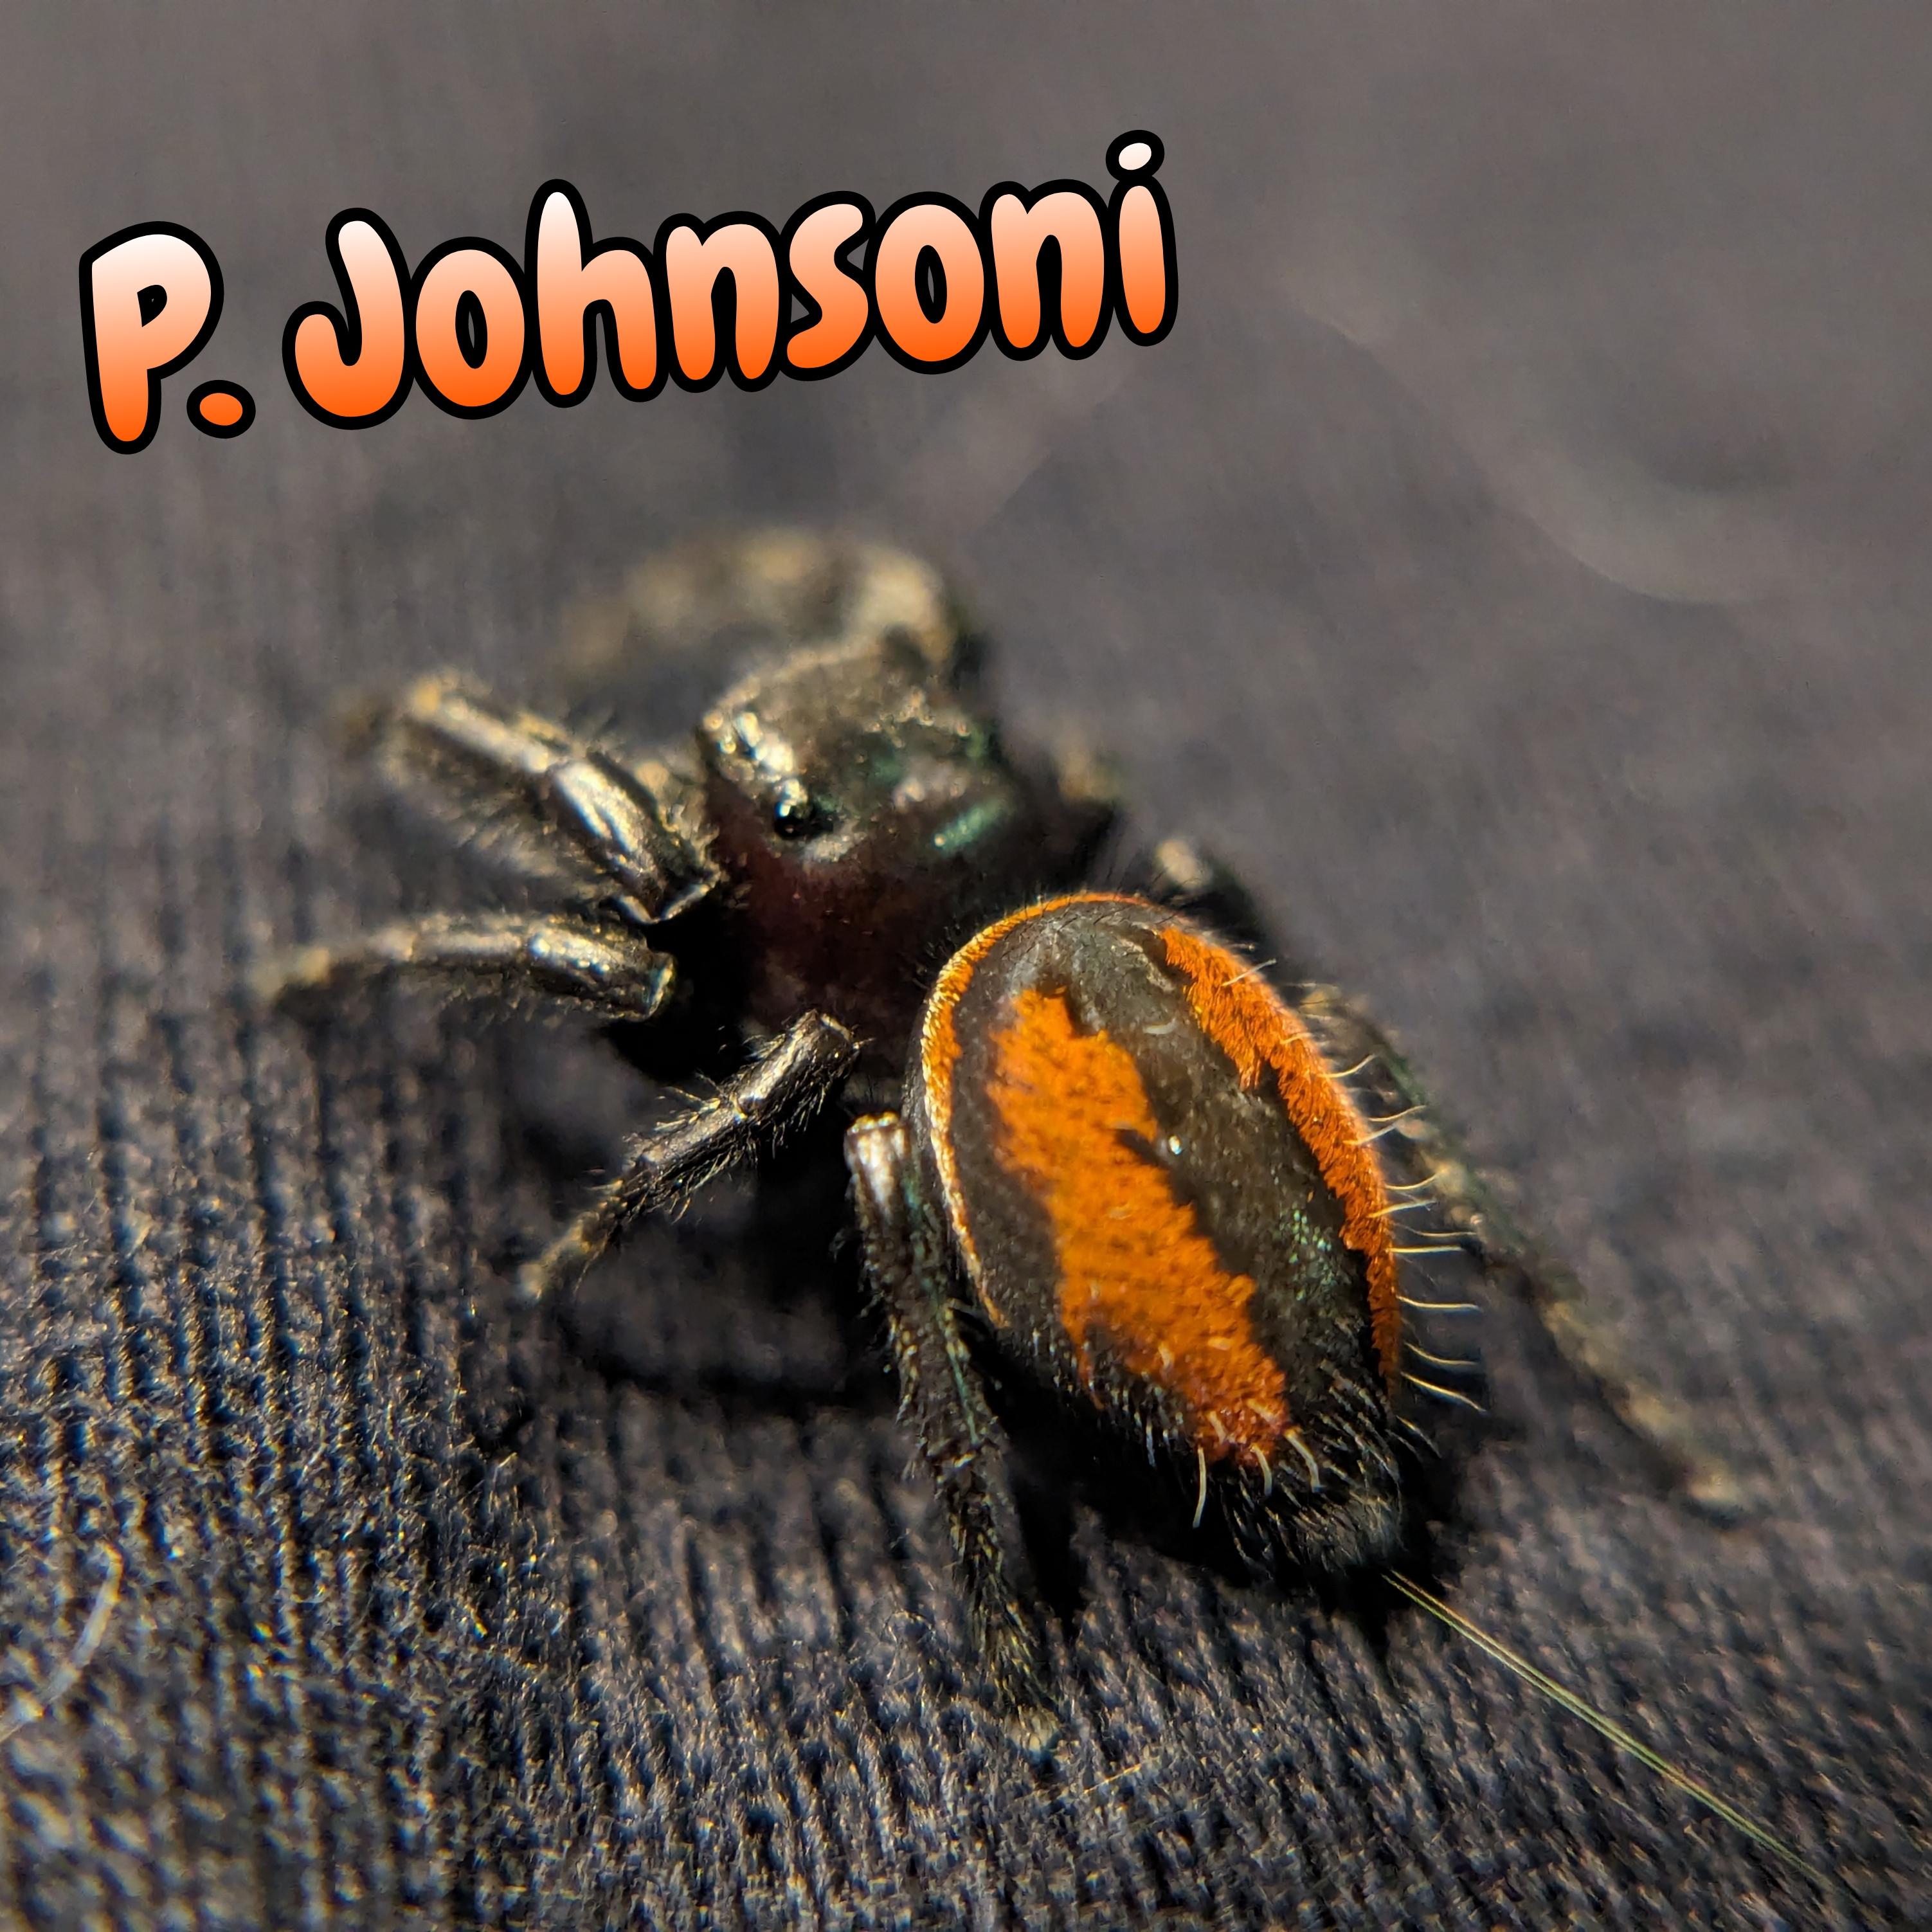 Red-Backed Jumping Spider (Phidippus johnsoni)